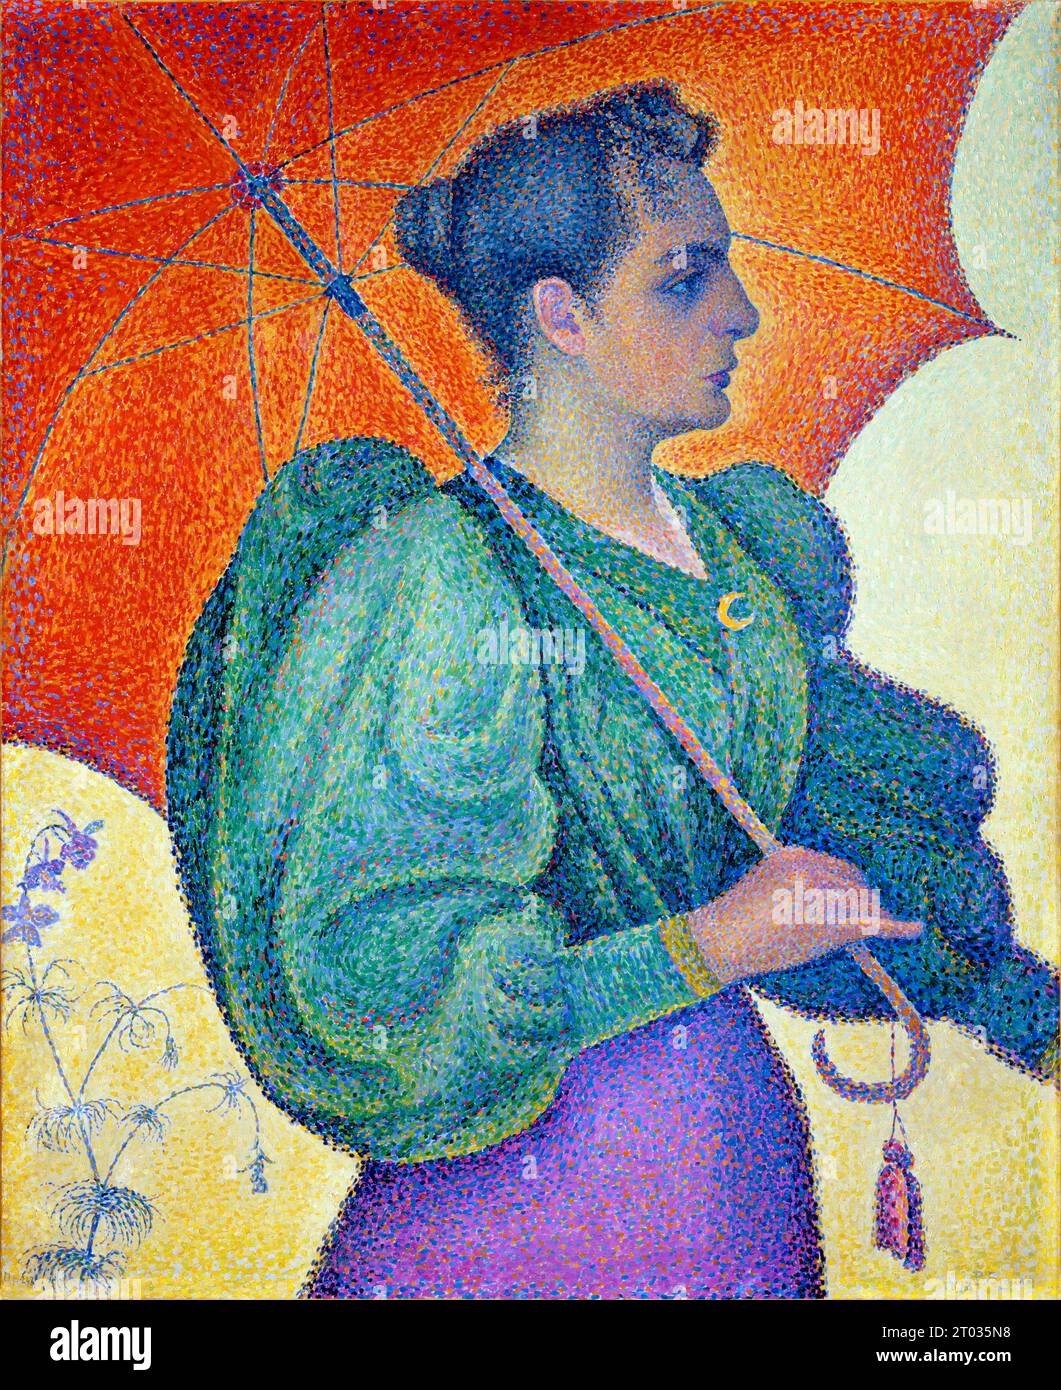 Portrait of his wife, Berthe, painted at Saint-Tropez by Paul Signac, 1893, Femme à l'ombrelle (Woman with Umbrella), Painting by Paul Signac Stock Photo